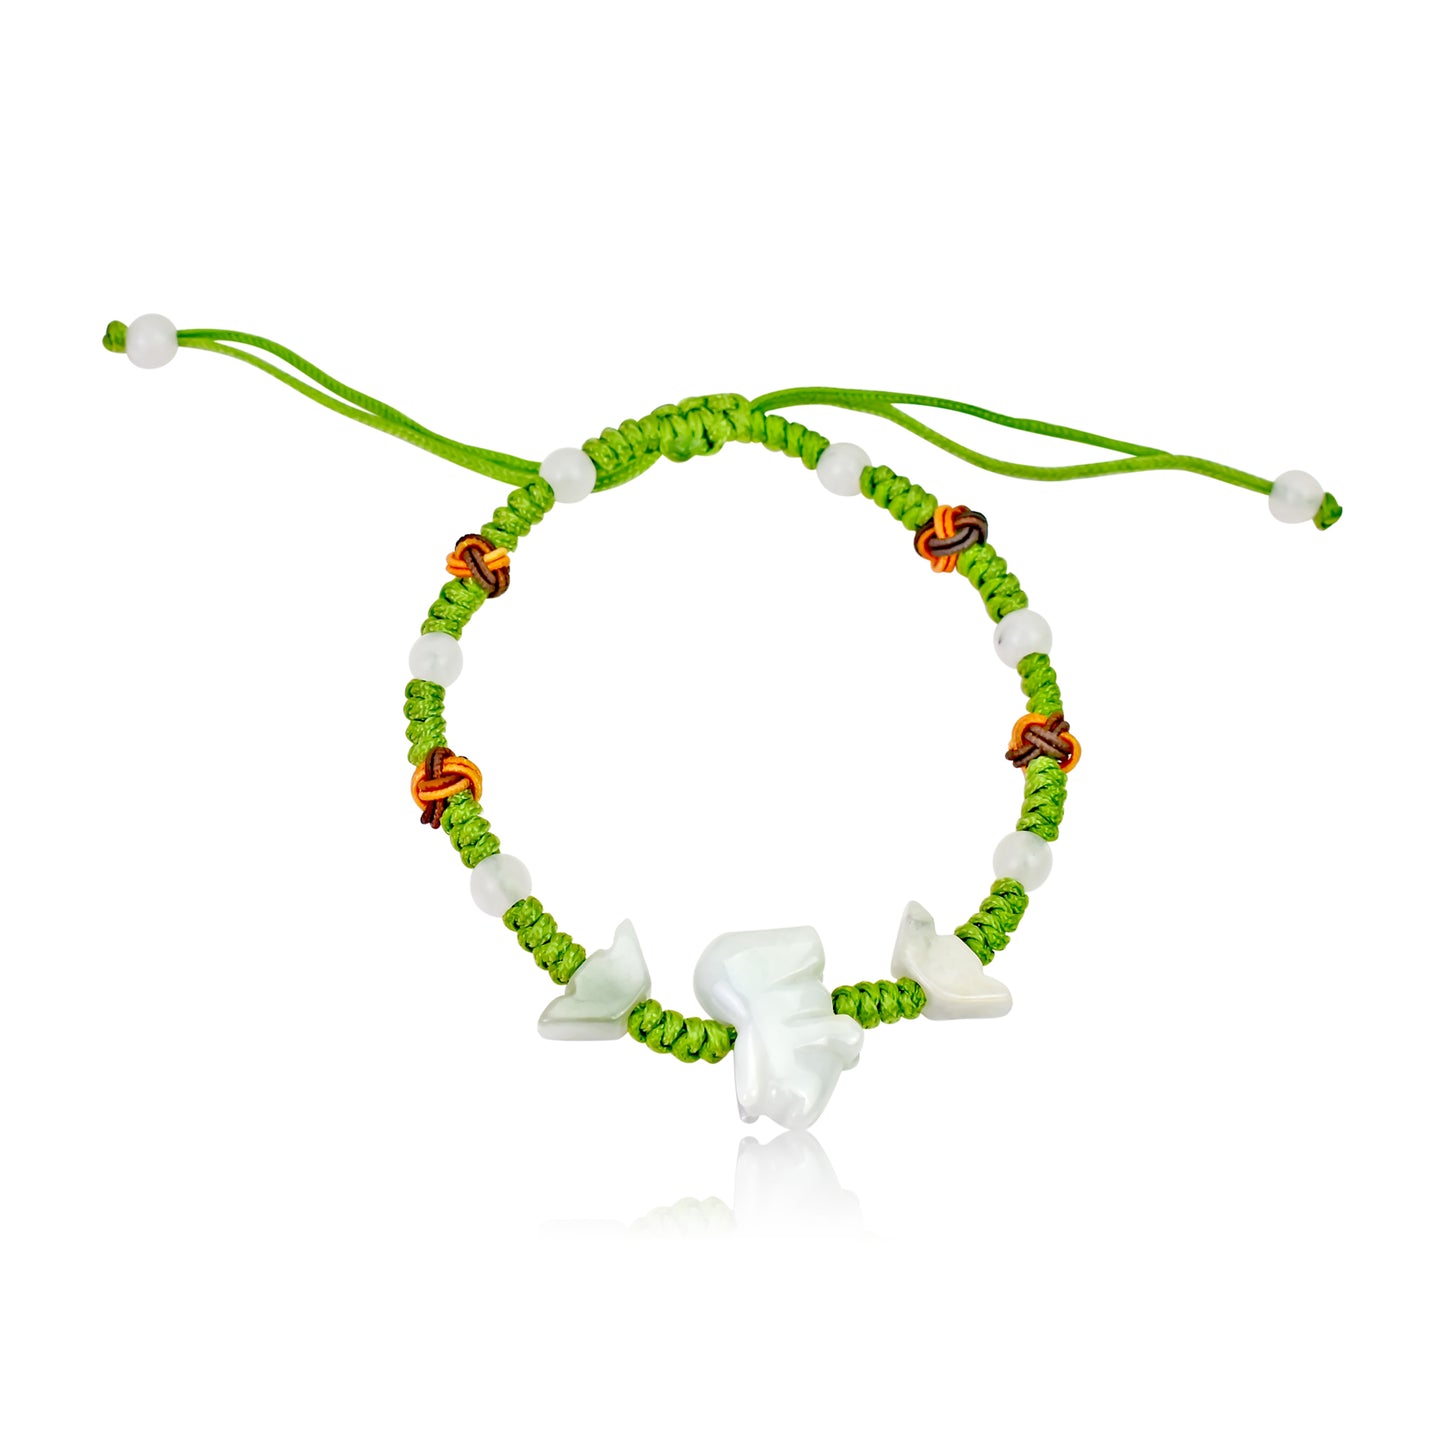 A Unique Gift: Boar Chinese Zodiac Handmade Jade Bracelet made with Lime Cord